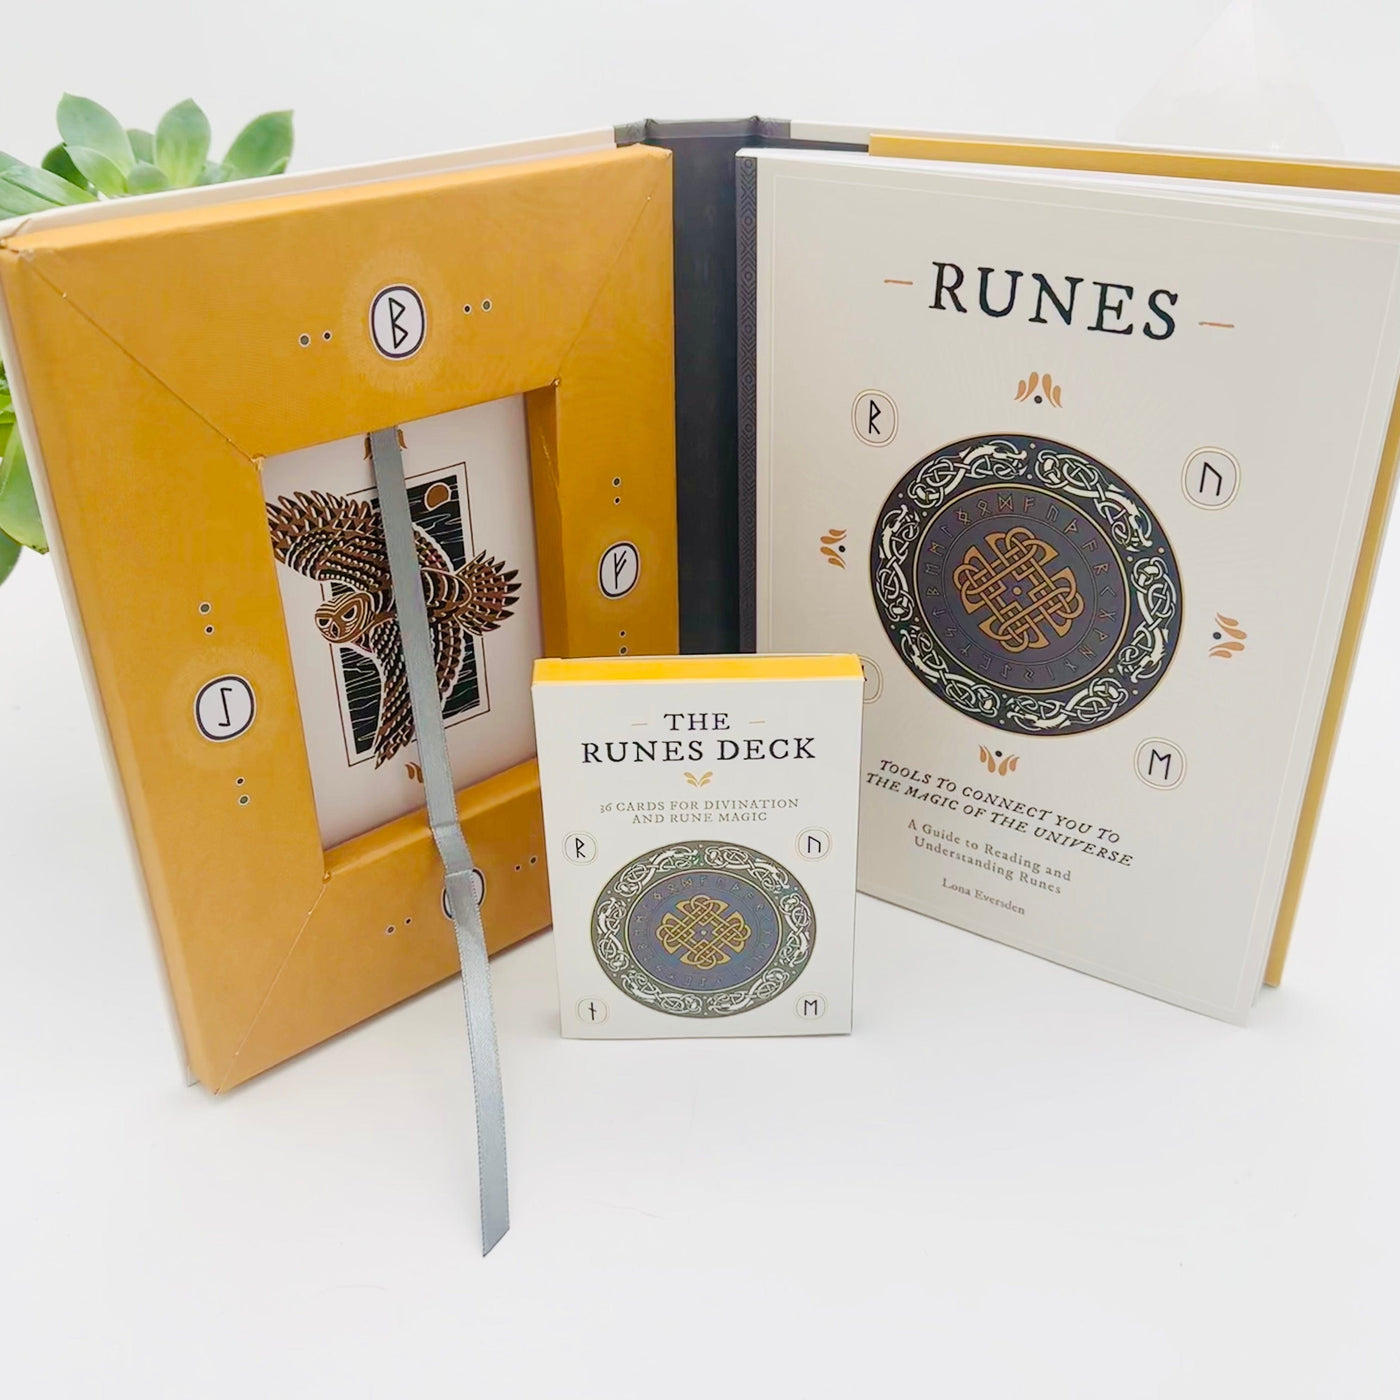 The Runes Box - inside and front view of book and cards